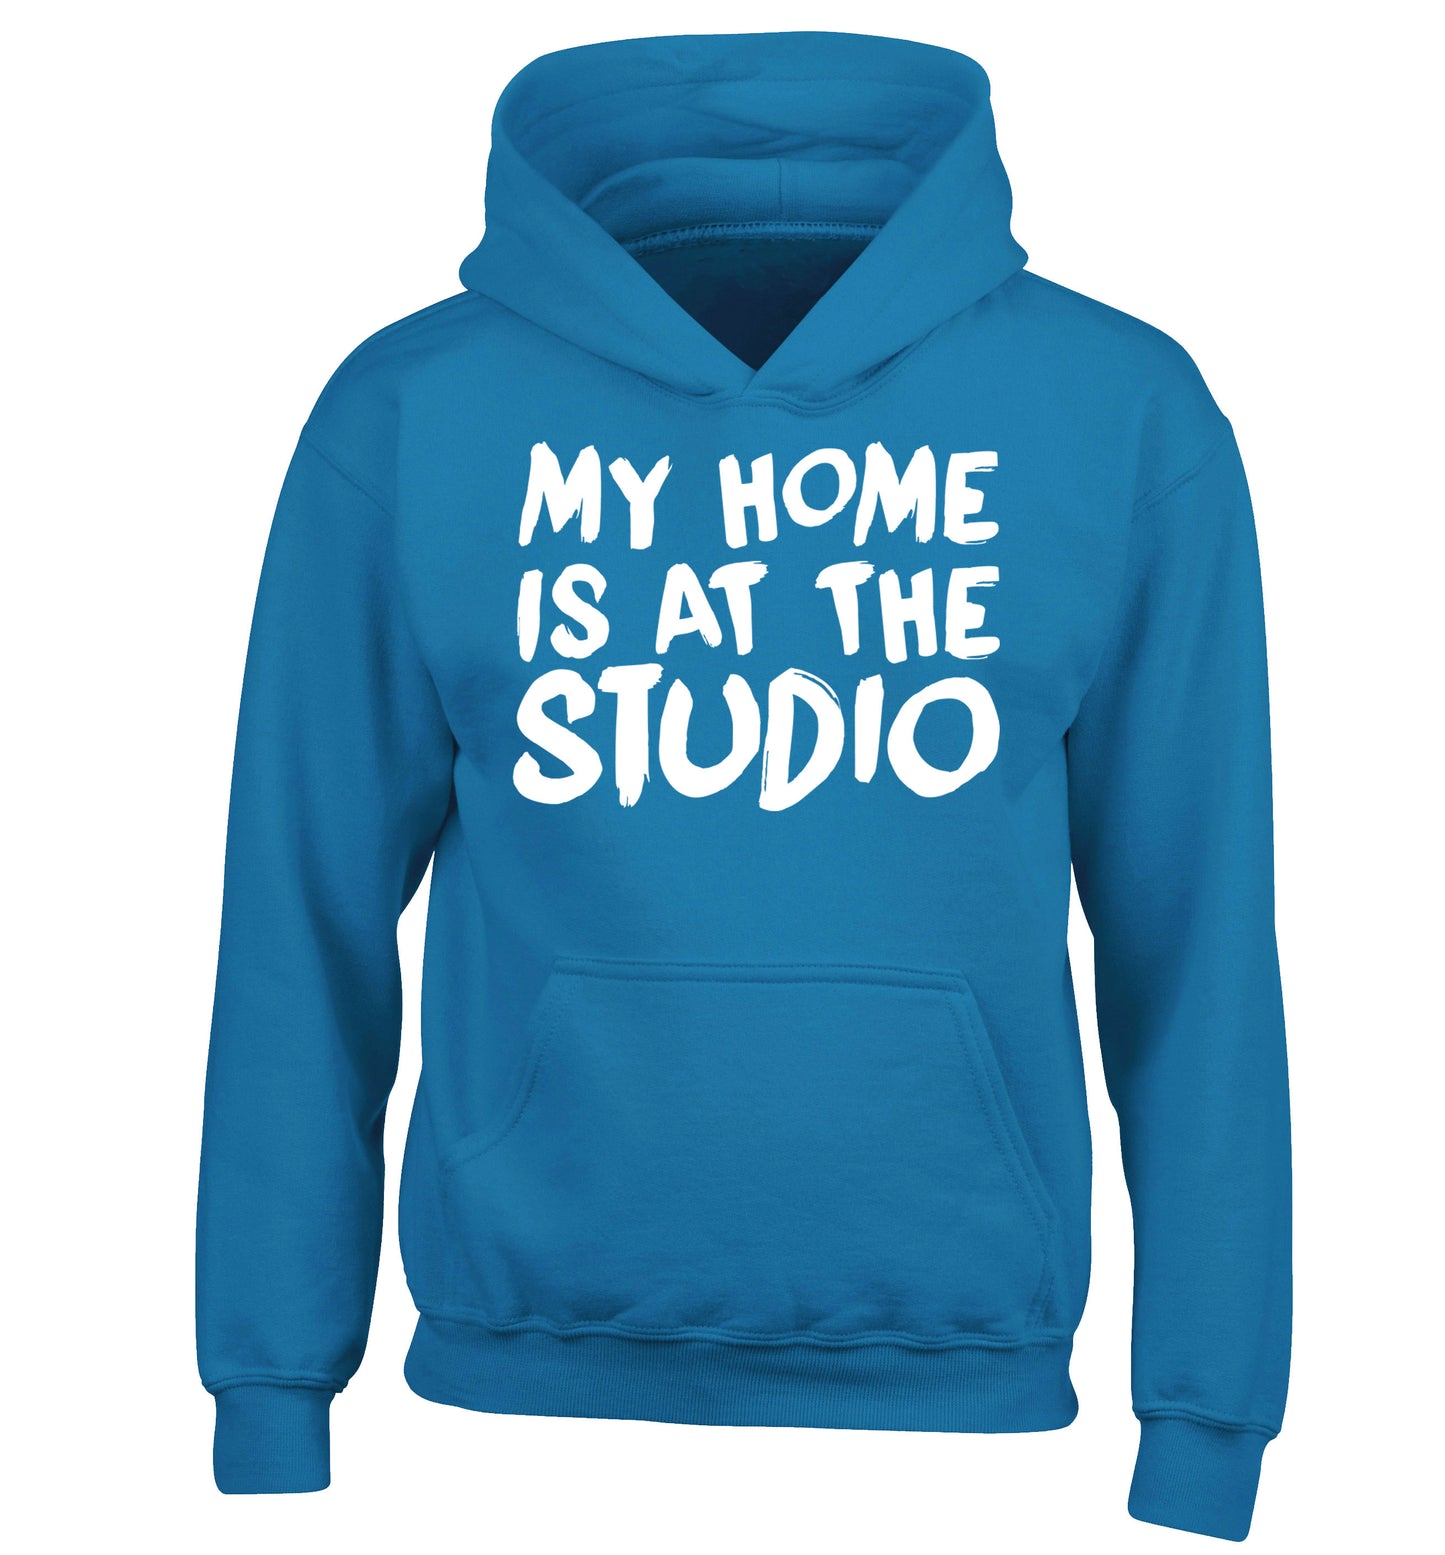 My home is at the studio children's blue hoodie 12-14 Years